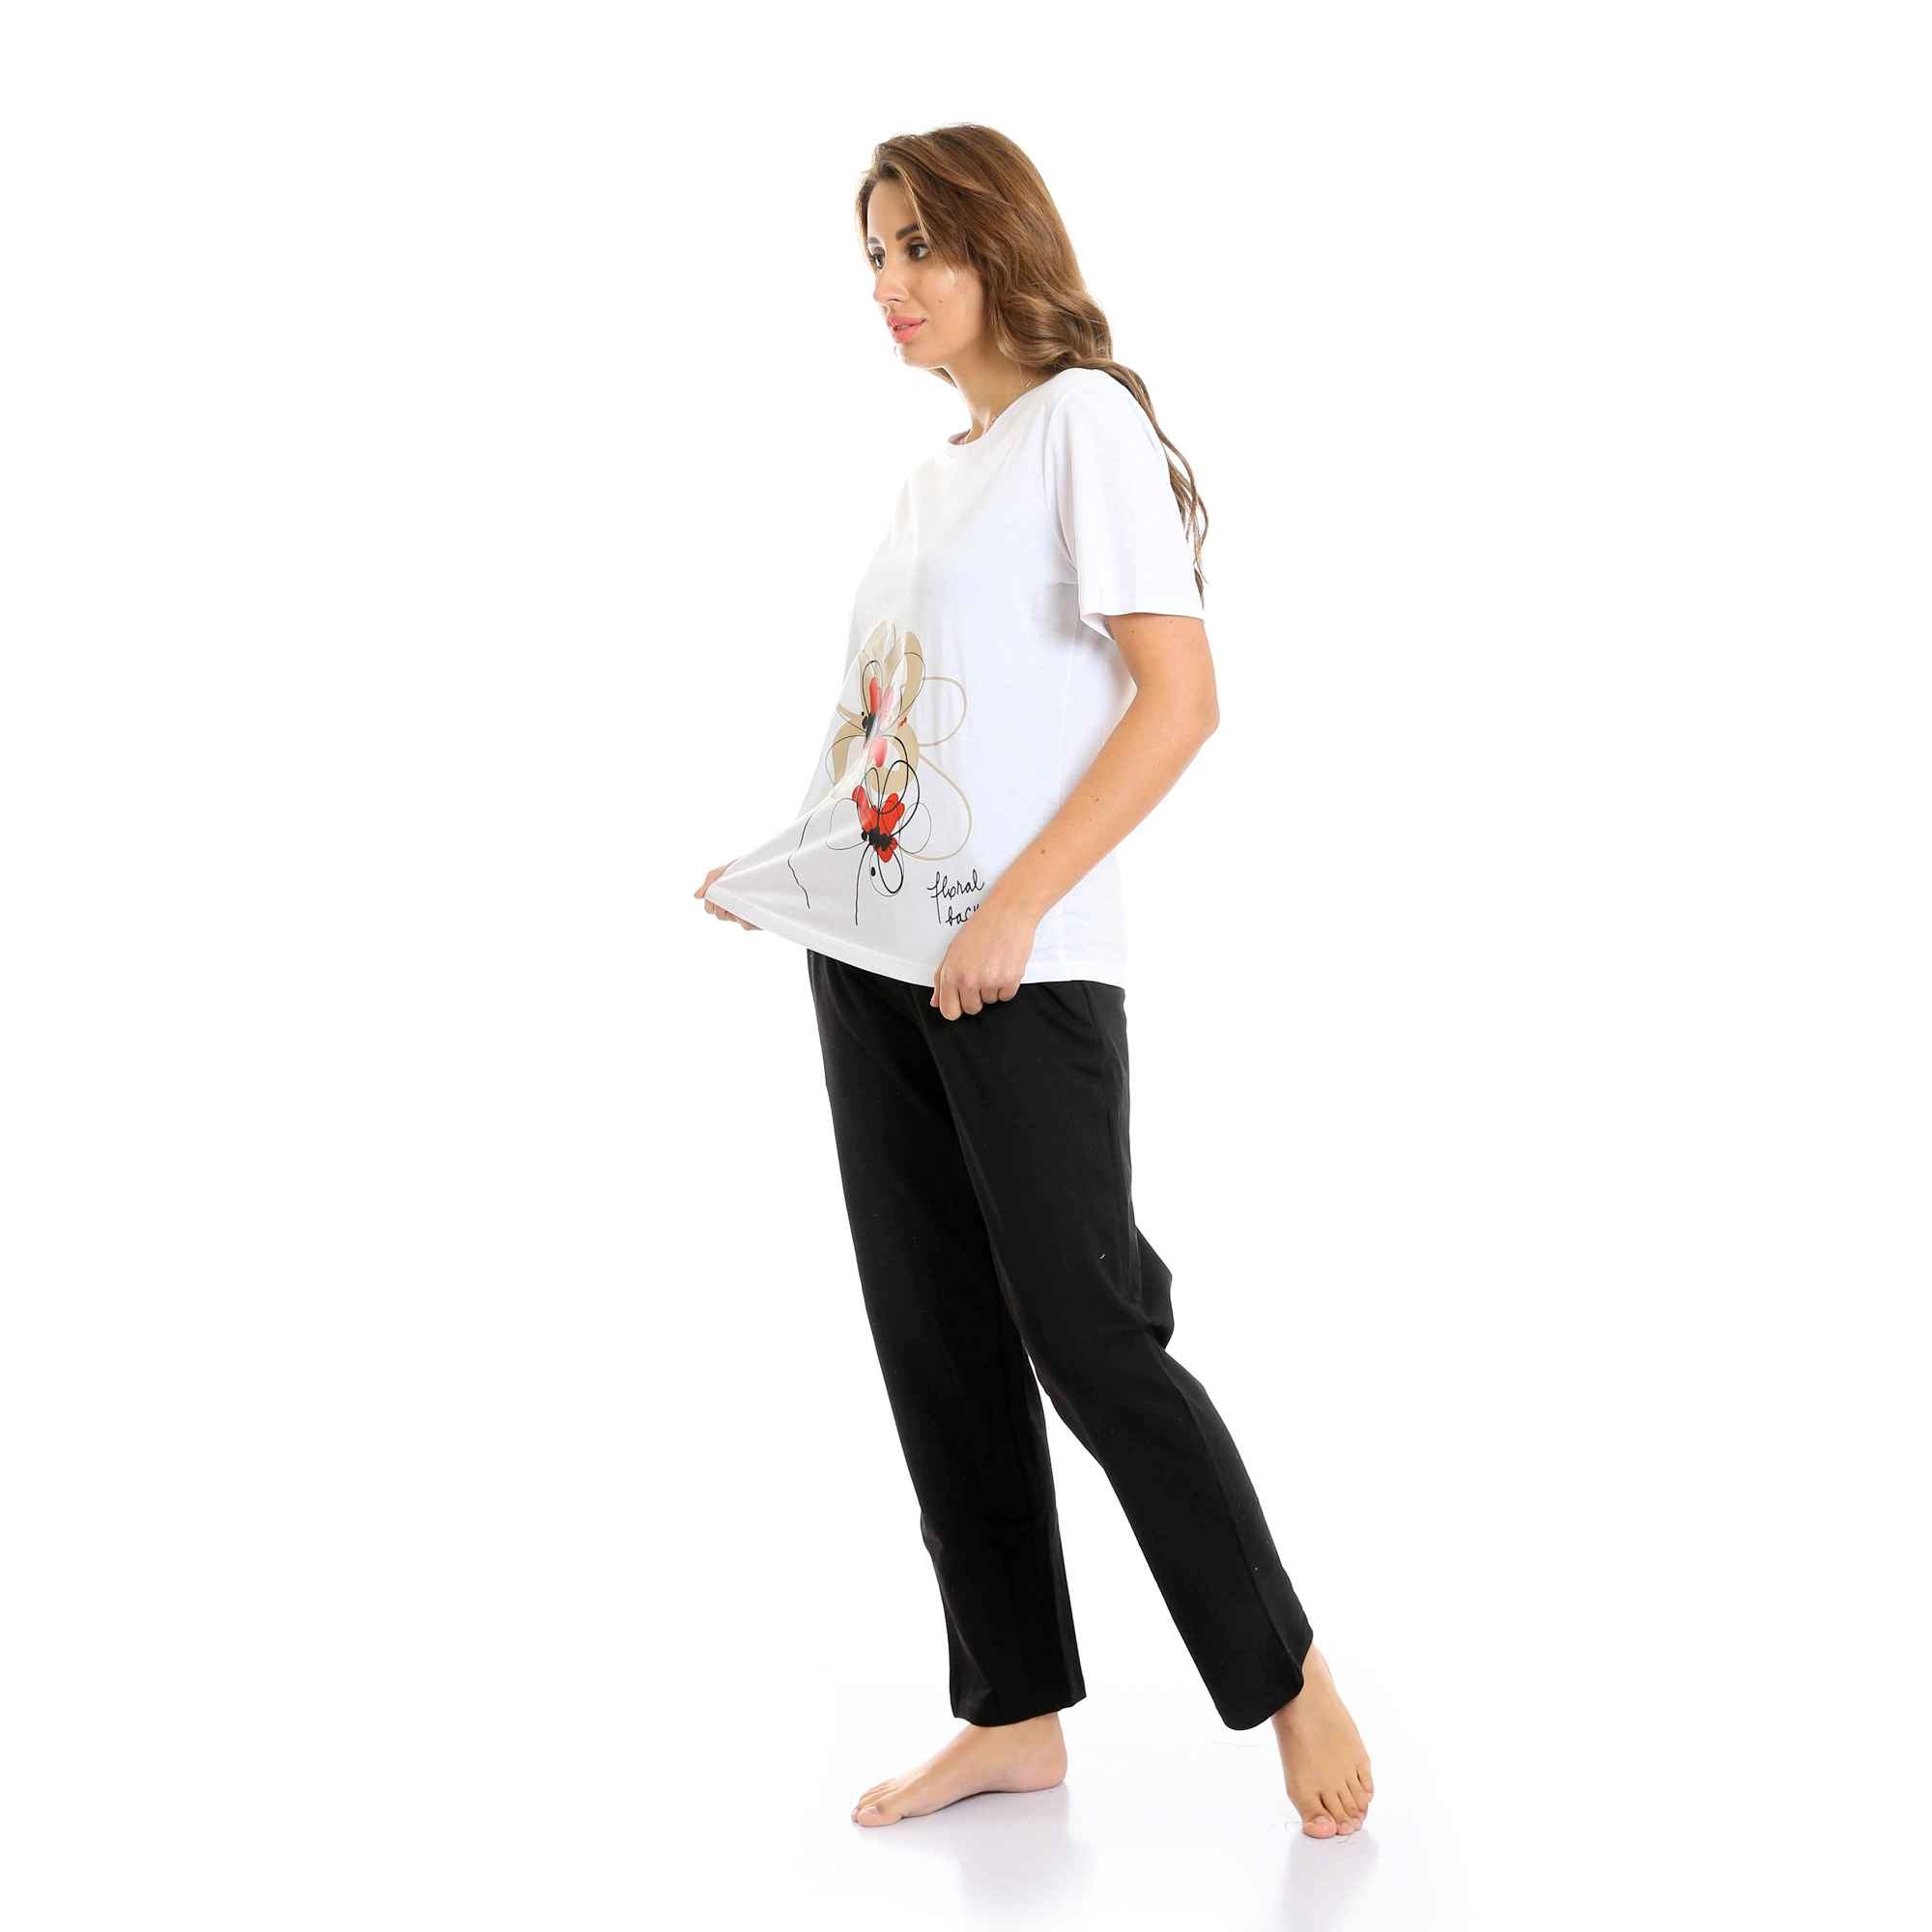 Red Cotton Comfortable and Stylish Activewear Pajamas for Women - White & Black